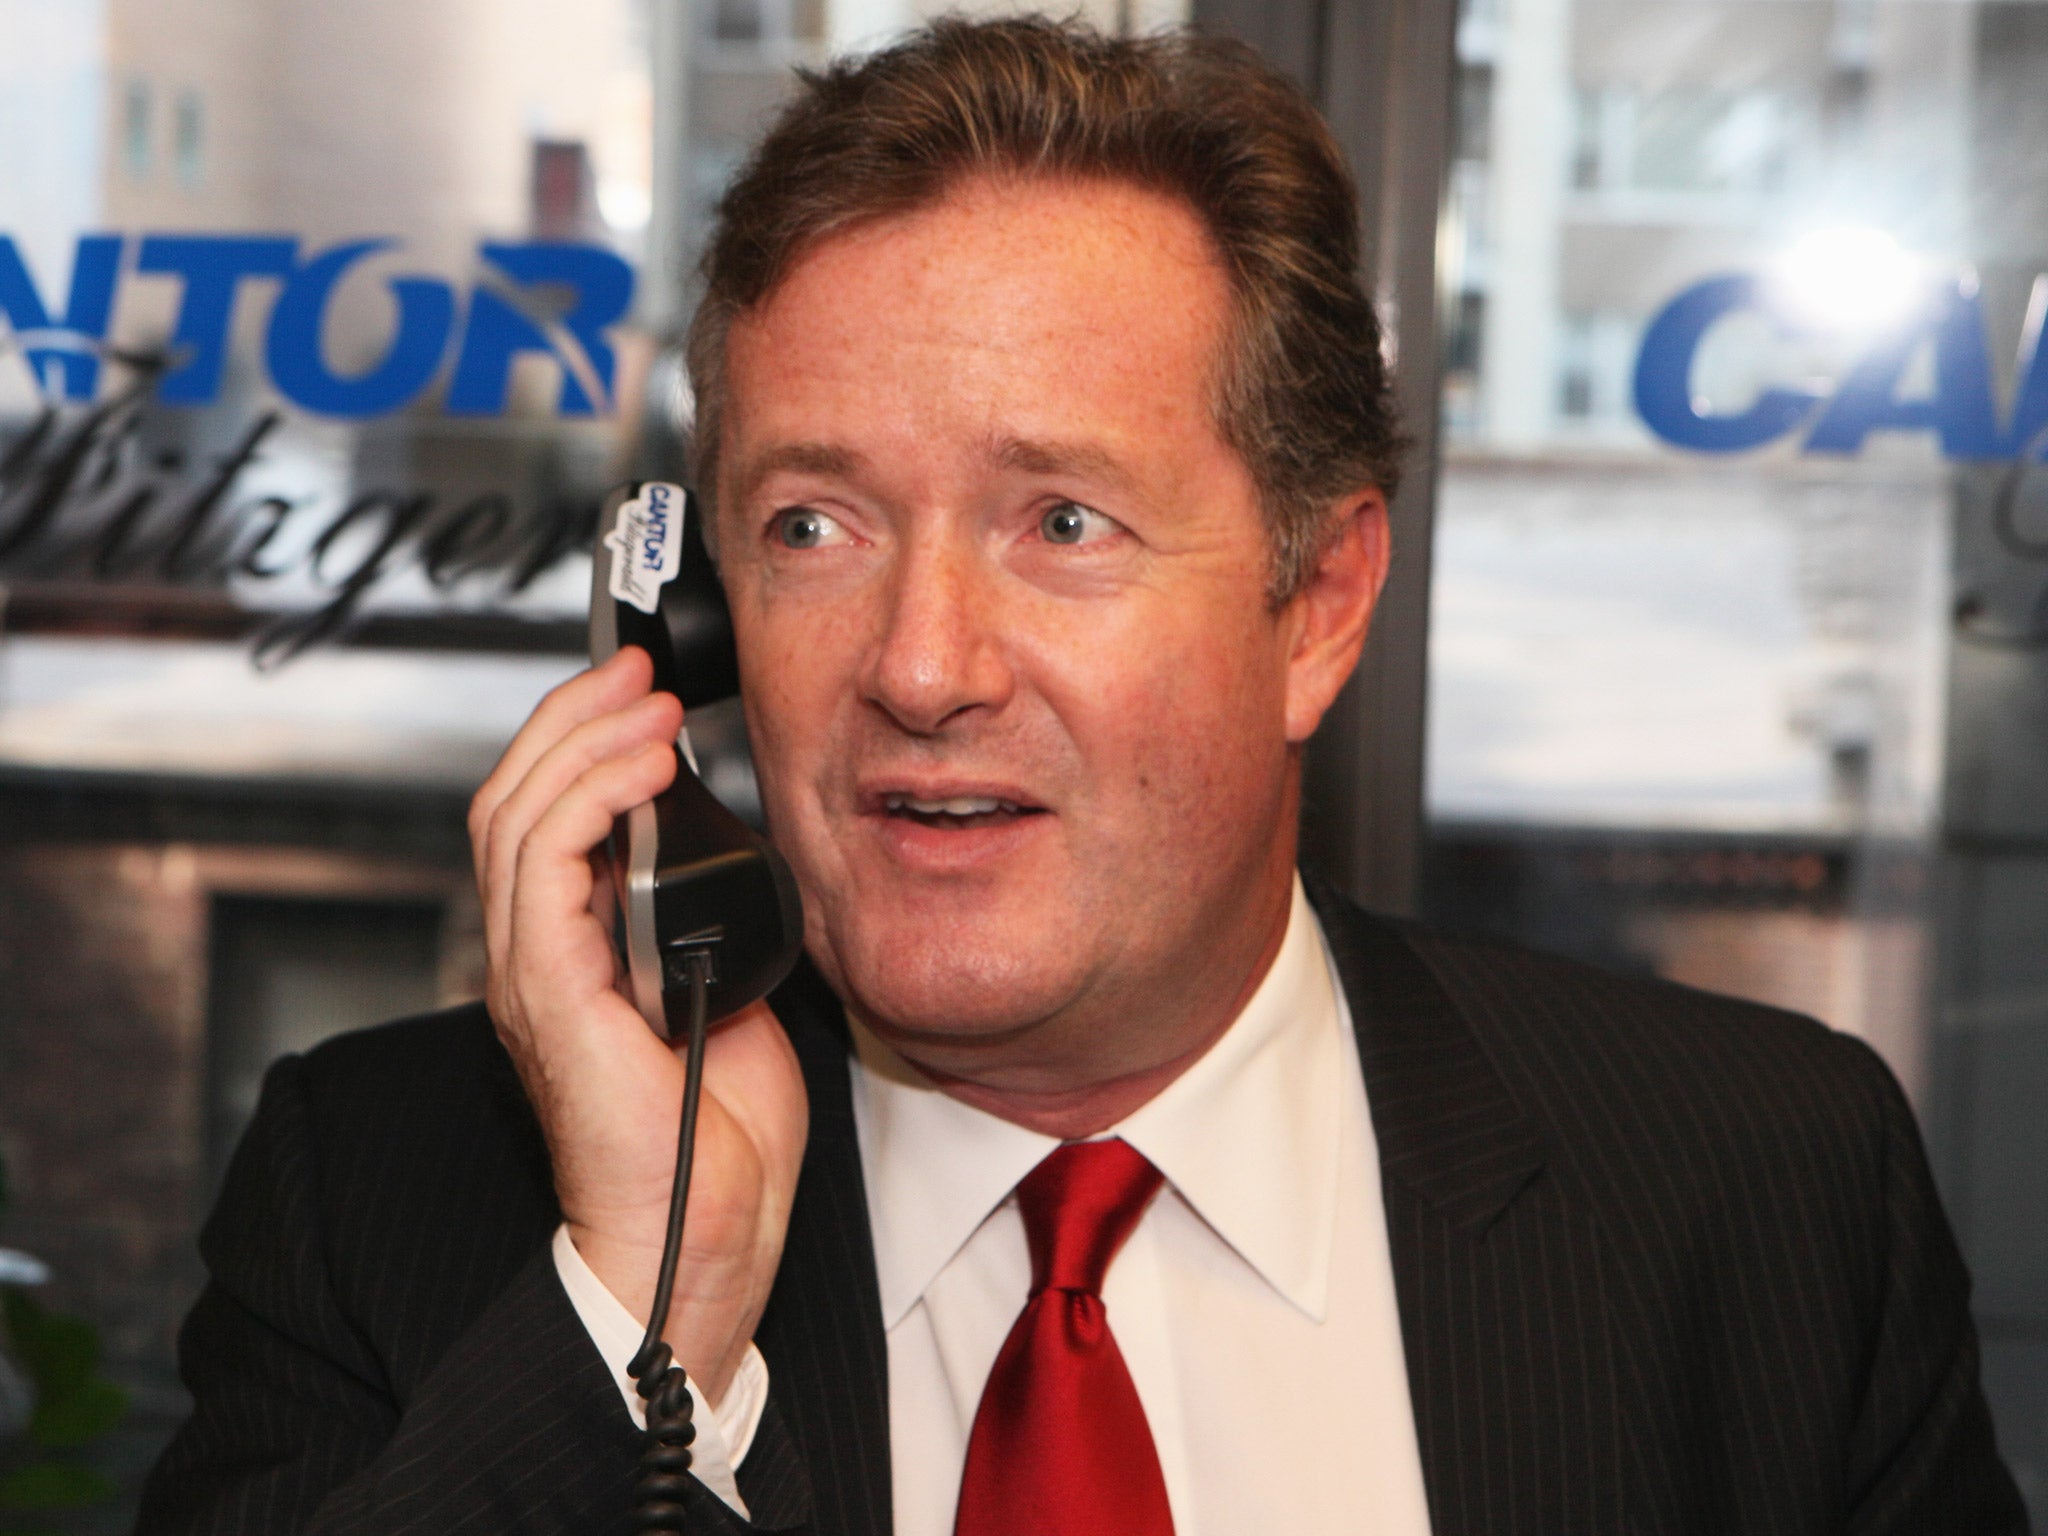 Piers Morgan was editor at the Daily Mirror for nine years